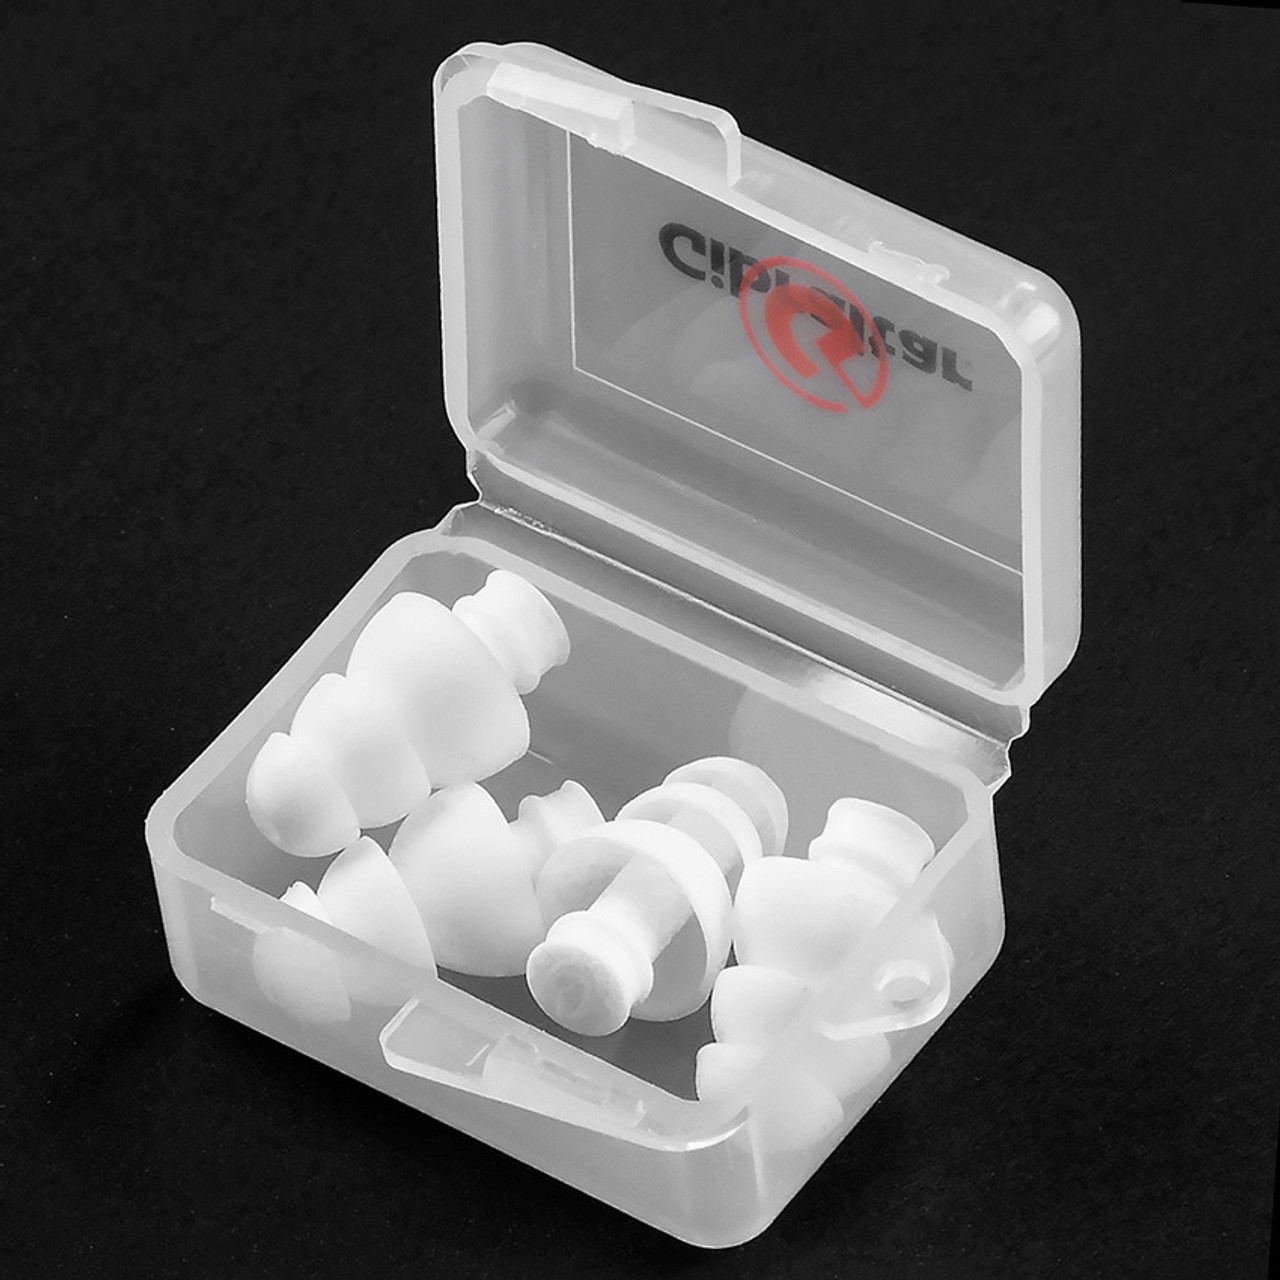 Gibraltar Ear Protection in Plastic Carry Case - 2 Pair